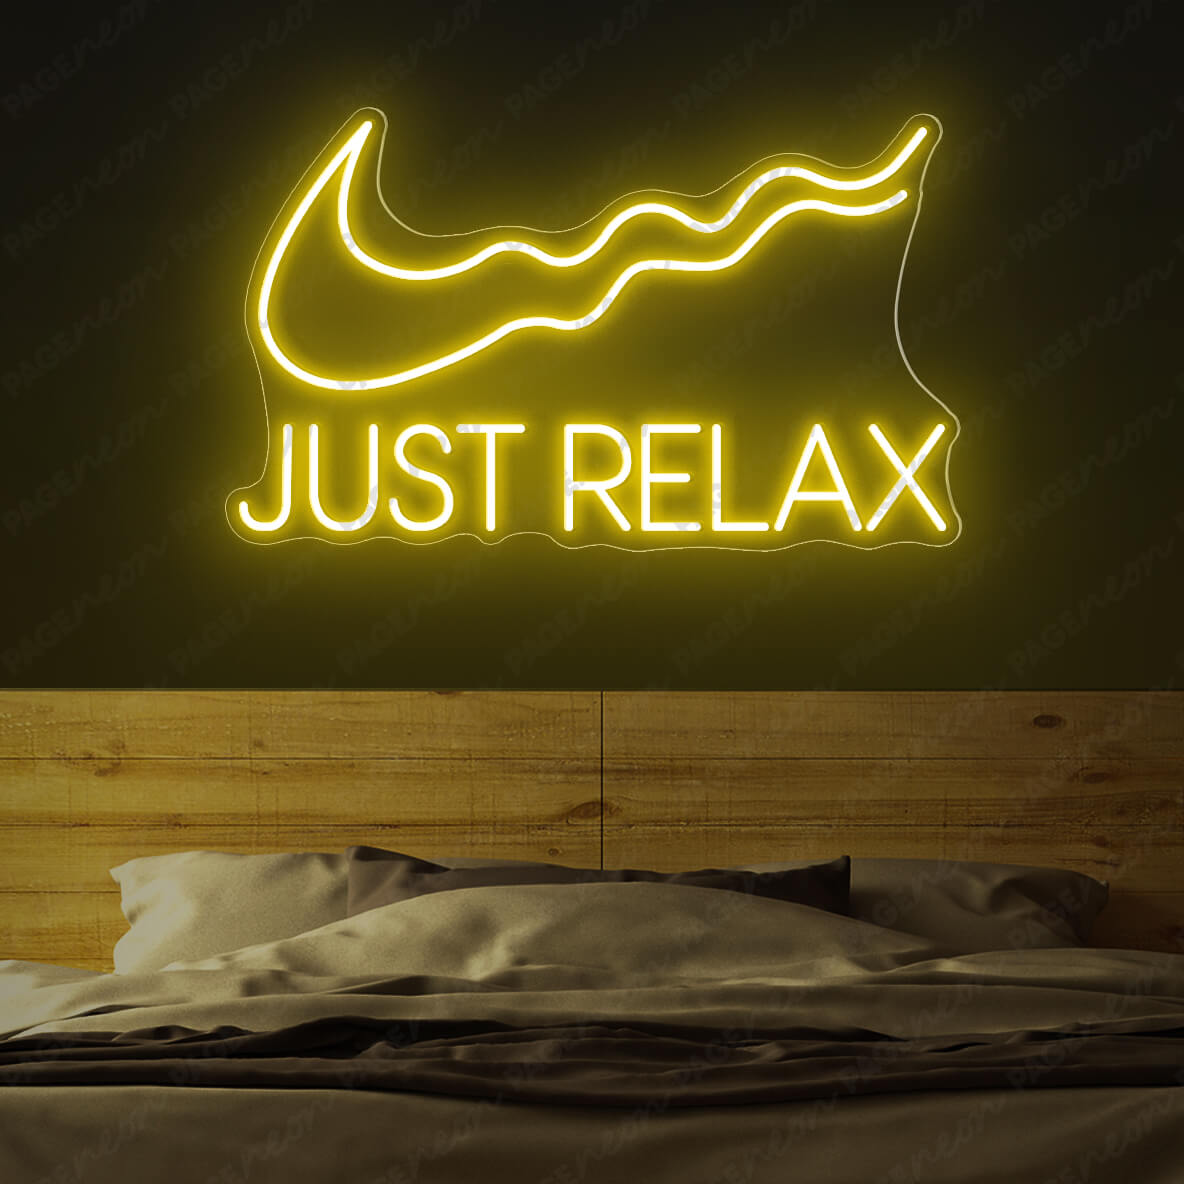 Just Relax Neon Sign Led Light Yellow